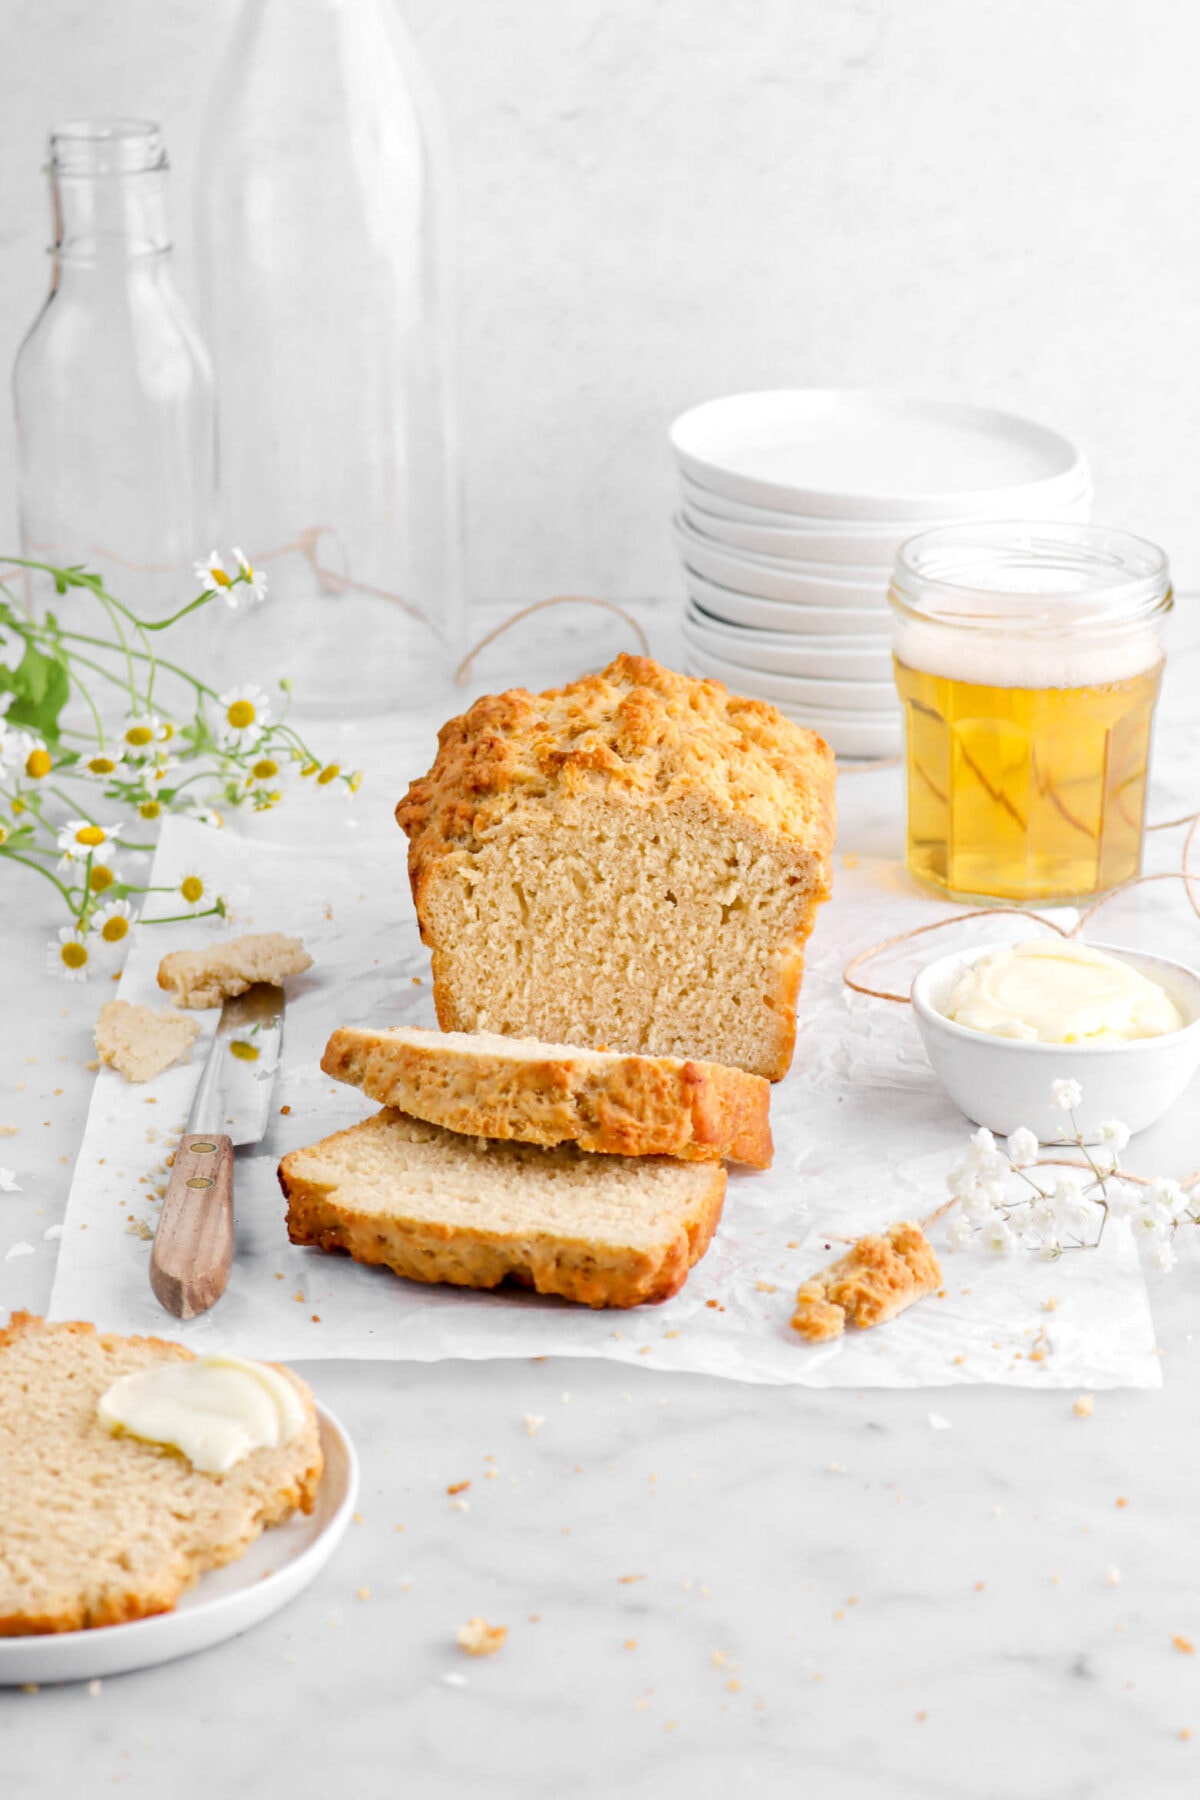 beer bread with two slices laying in front of loaf on parchment paper with bowl of butter and a knife beside, bread crumbs, and flowers around, with another slice of bread on white plate with smear of butter on top.